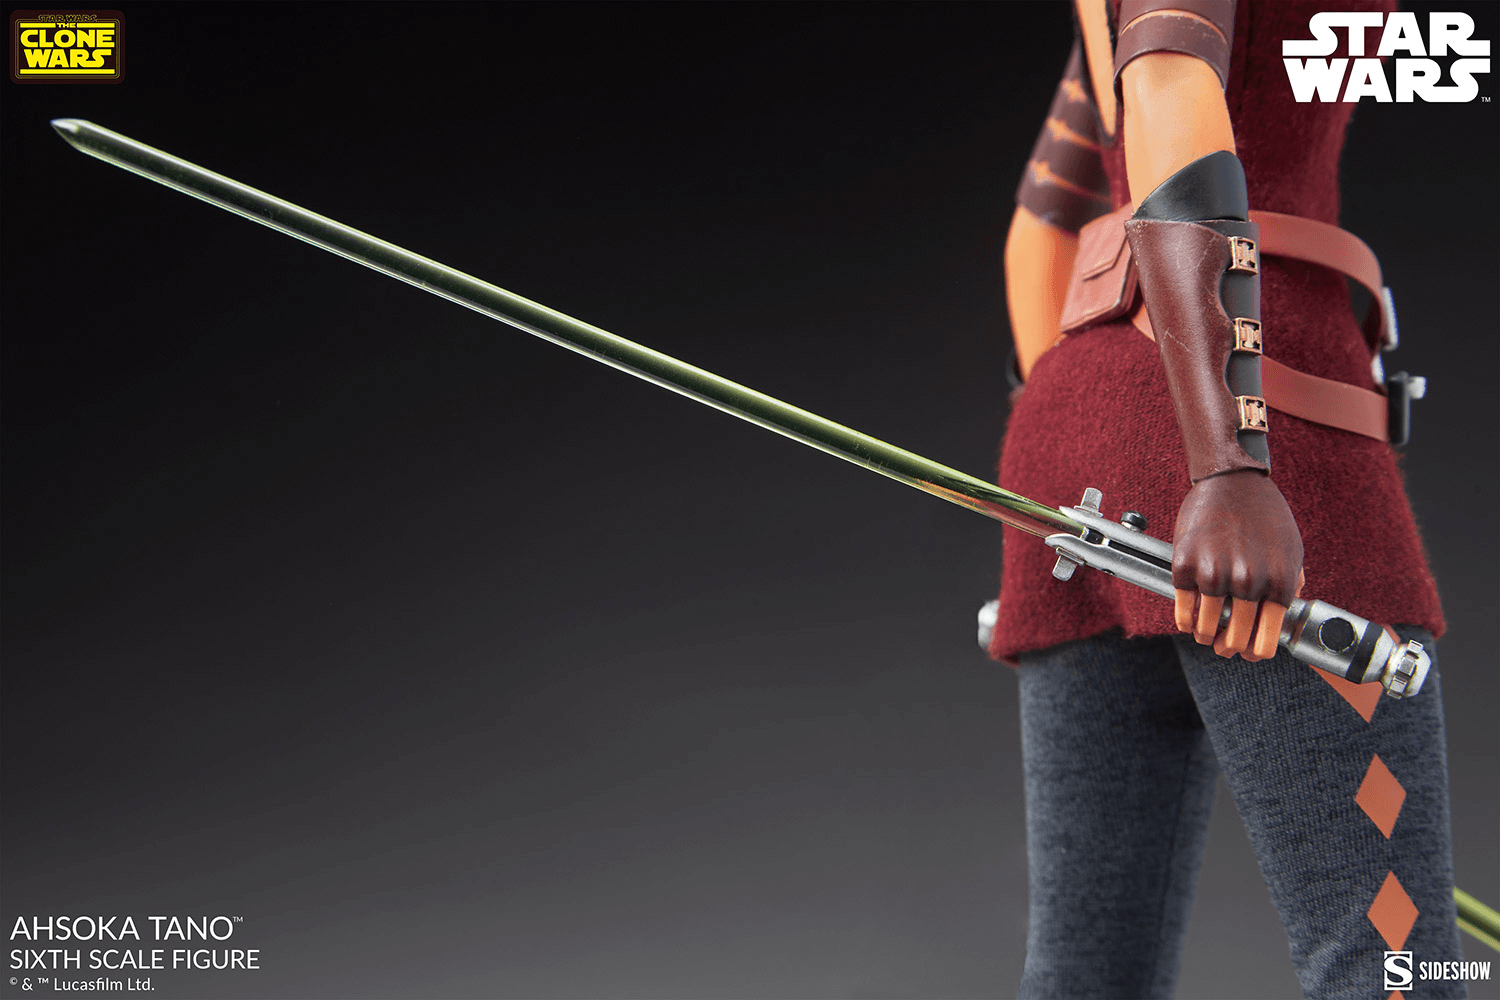 SID100444 Star Wars: The Clone Wars - Ahsoka Tano 1:4 Scale Action Figure - Sideshow Collectibles - Titan Pop Culture